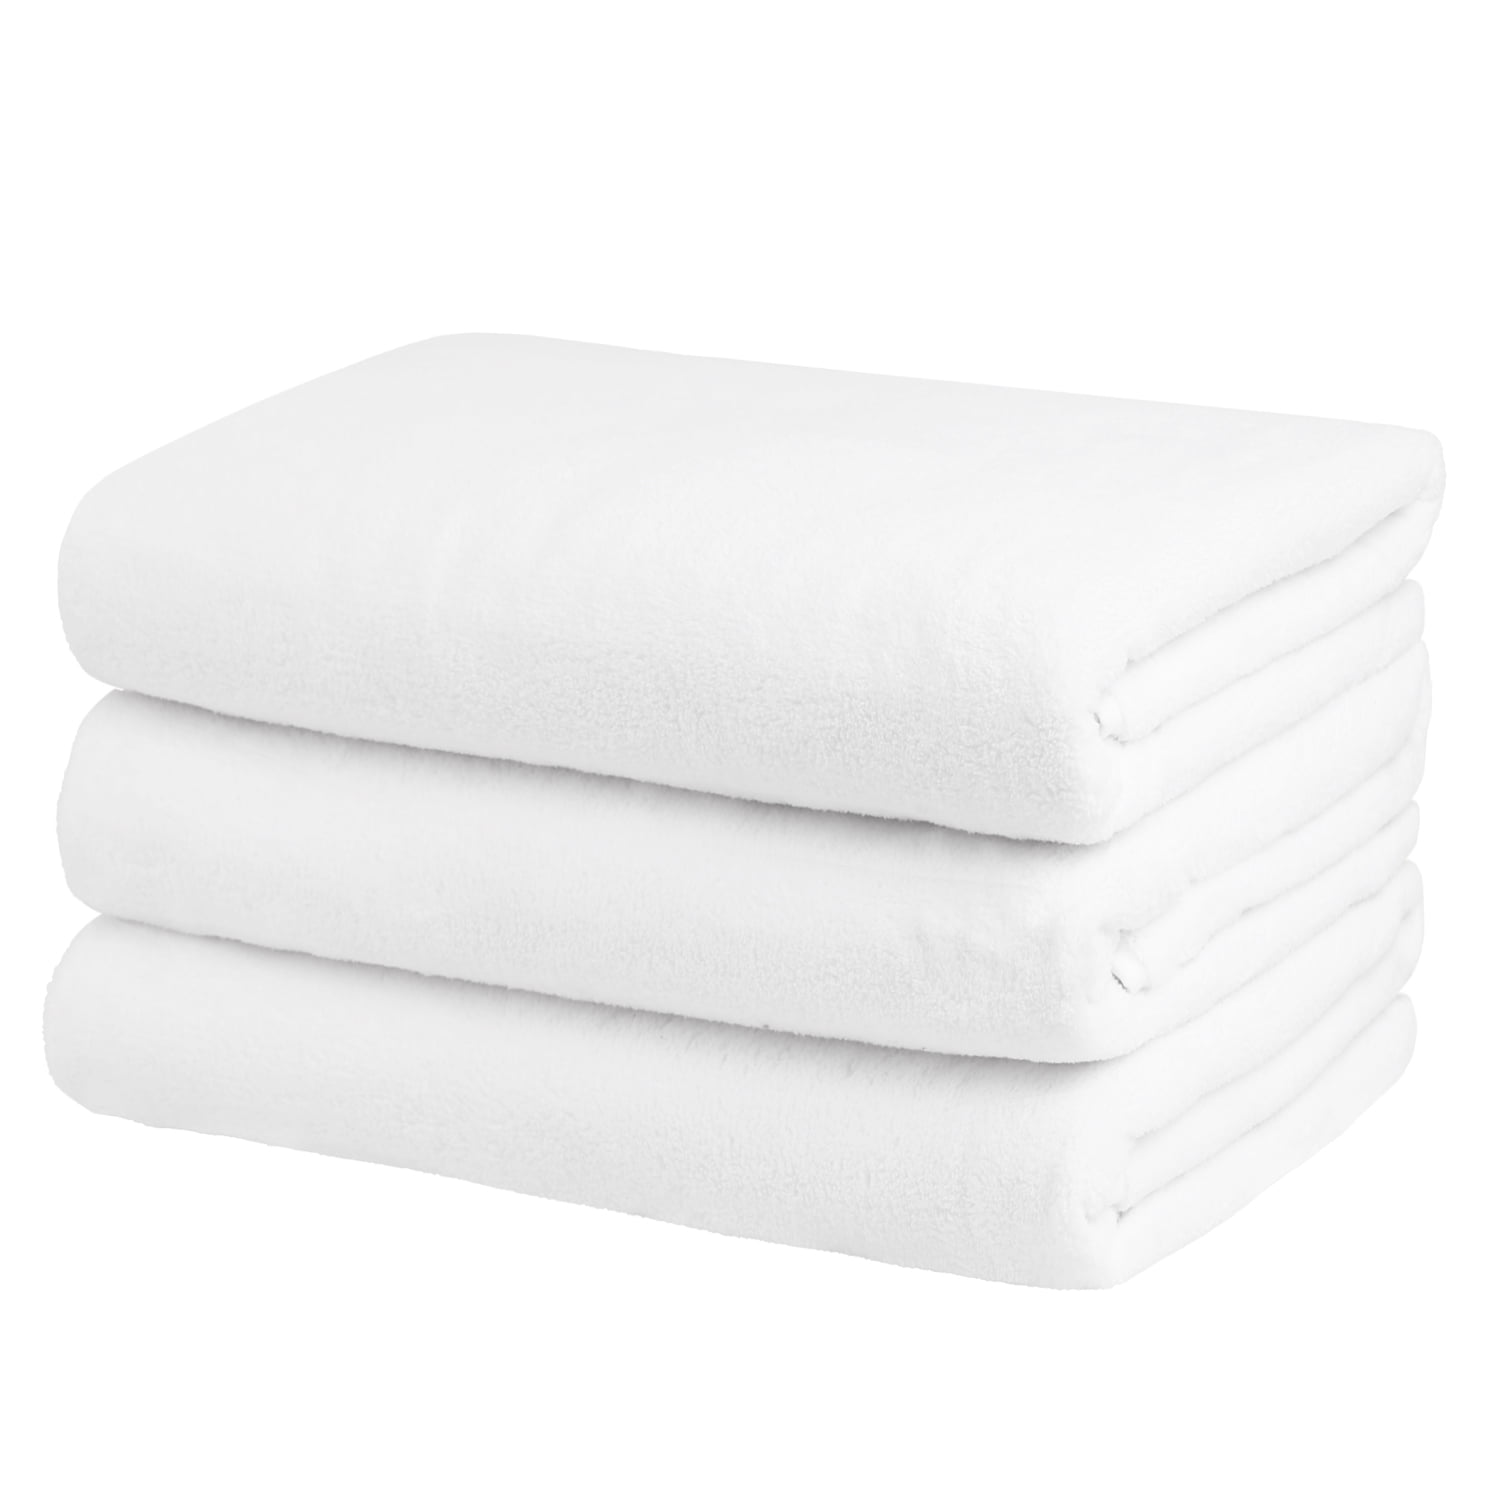 Fleece White, 3 Pack Soft Bath Towel 3 Pack Yoga Super Absorbent and Fast Drying 27 x 55 Travel Fitness JML Fleece Bath Towels Fleece Towels for Sports 